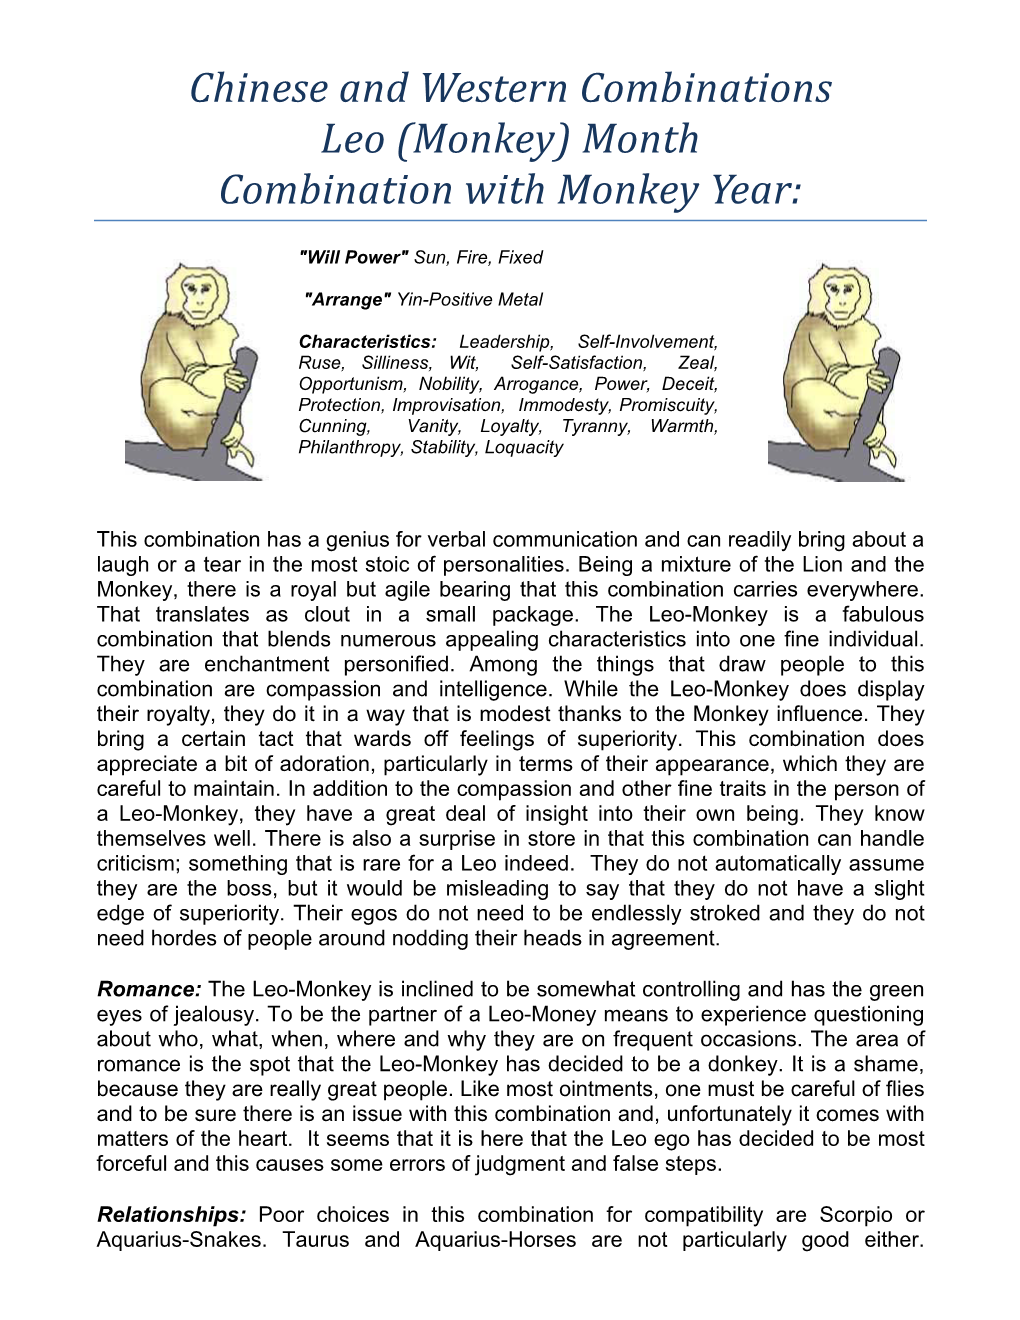 Chinese and Western Combinations Leo (Monkey) Month Combination with Monkey Year